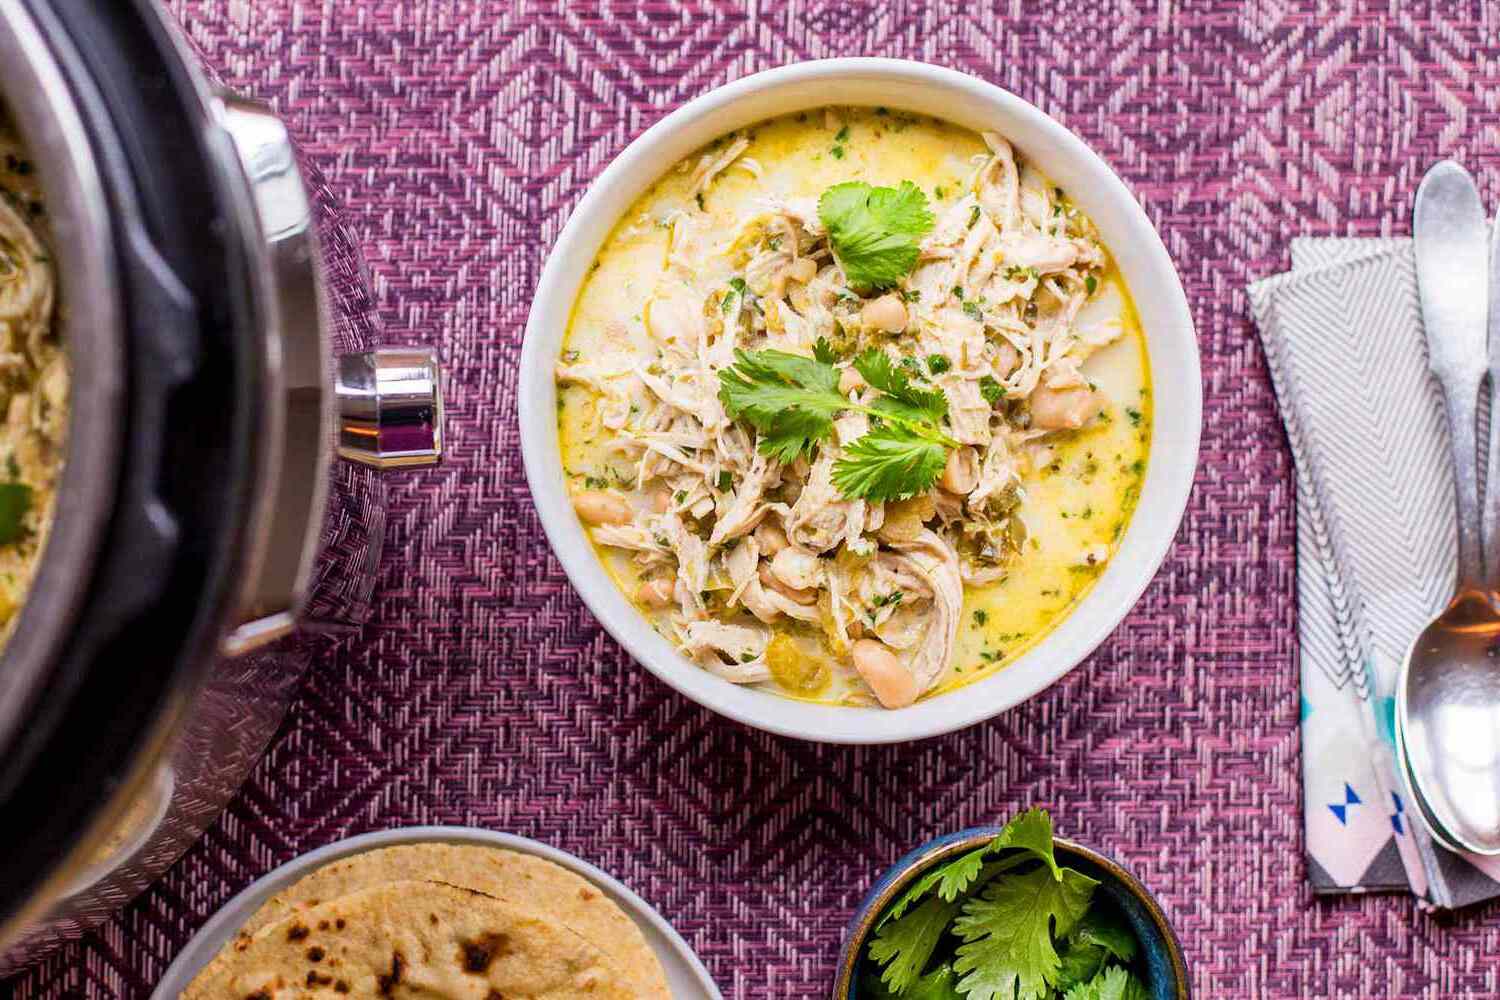 How to Make White Bean Chicken Chili in the Pressure Cooker